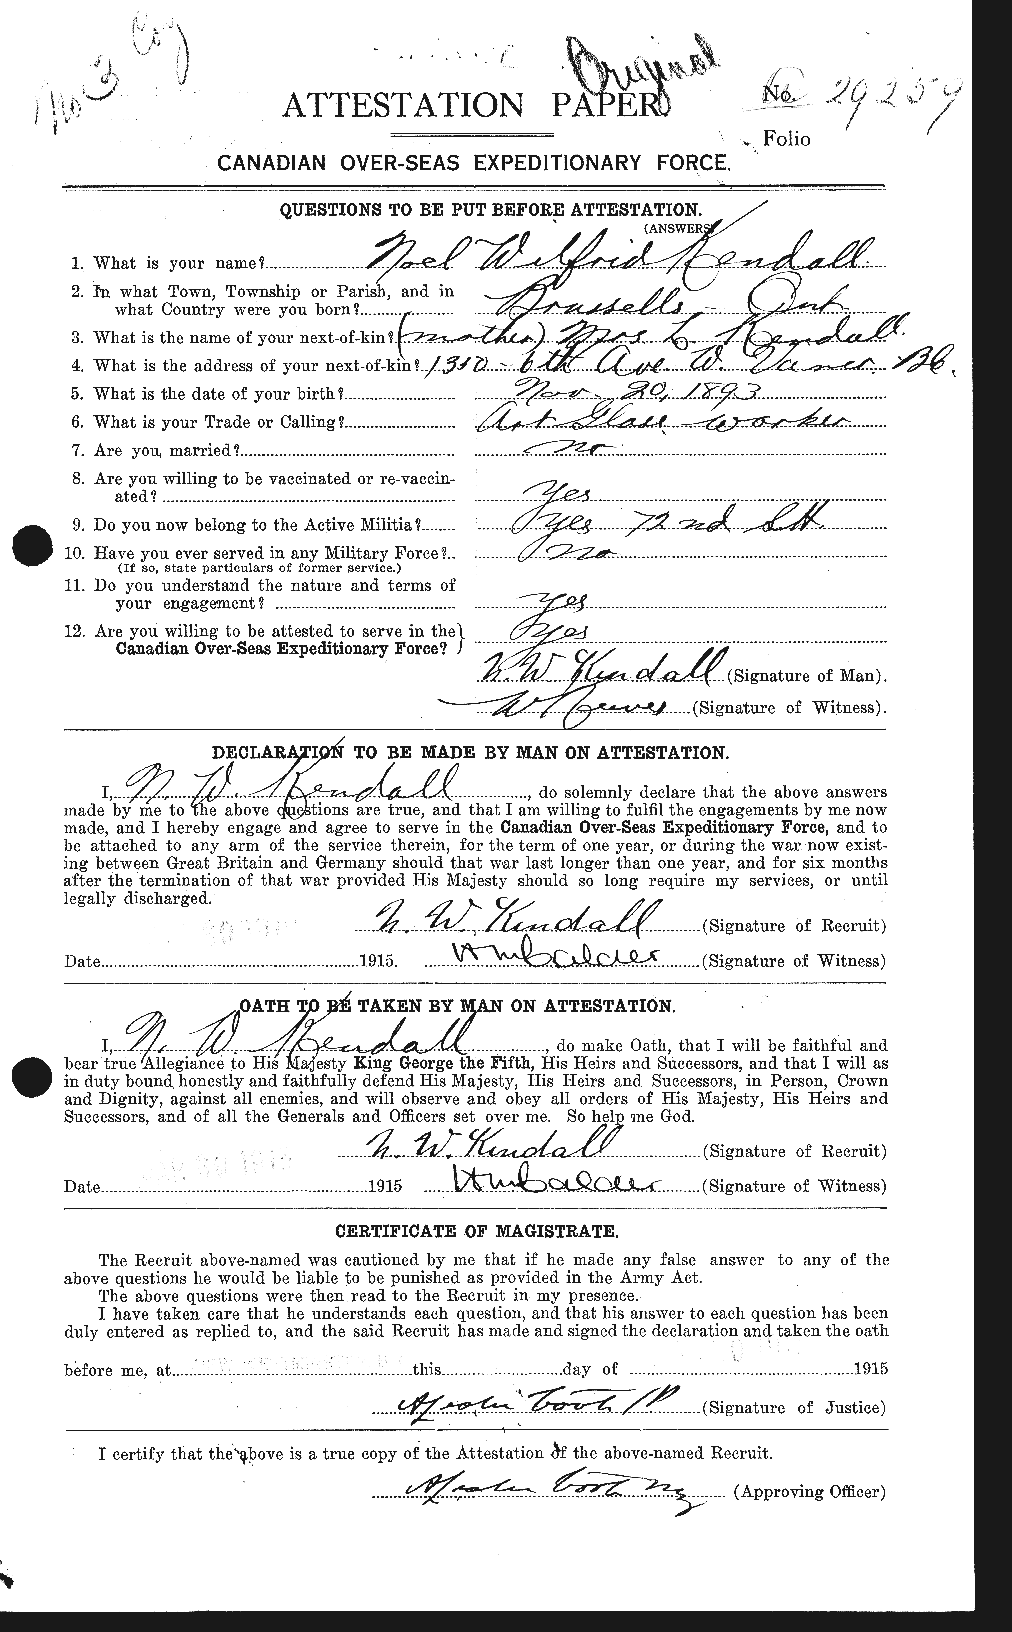 Personnel Records of the First World War - CEF 435593a